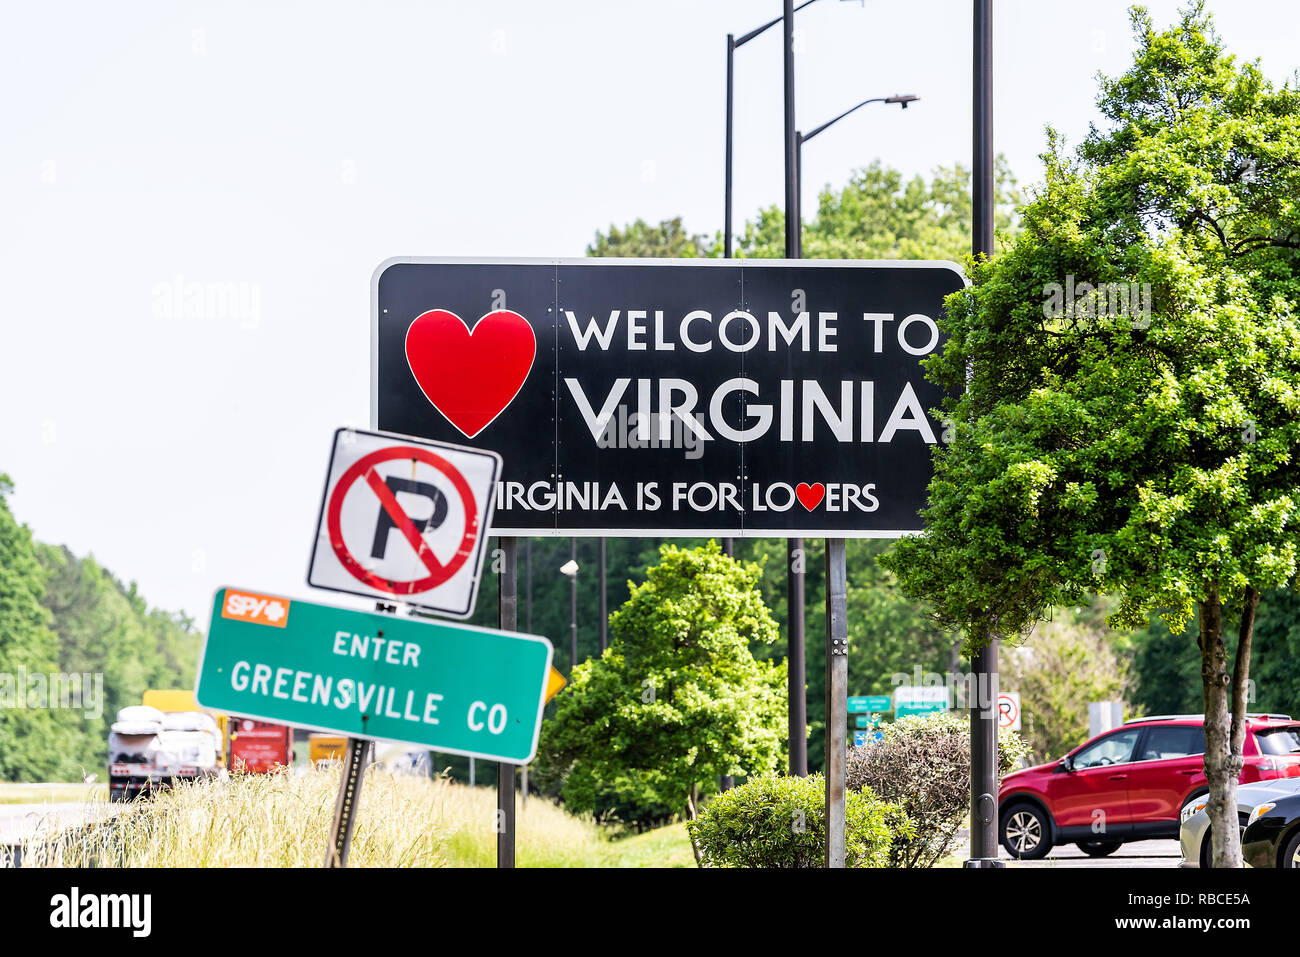 Skippers, USA - May 14, 2018: Highway road with welcome sign by Welcome Center Rest Area with Virginia is For Lovers text Stock Photo